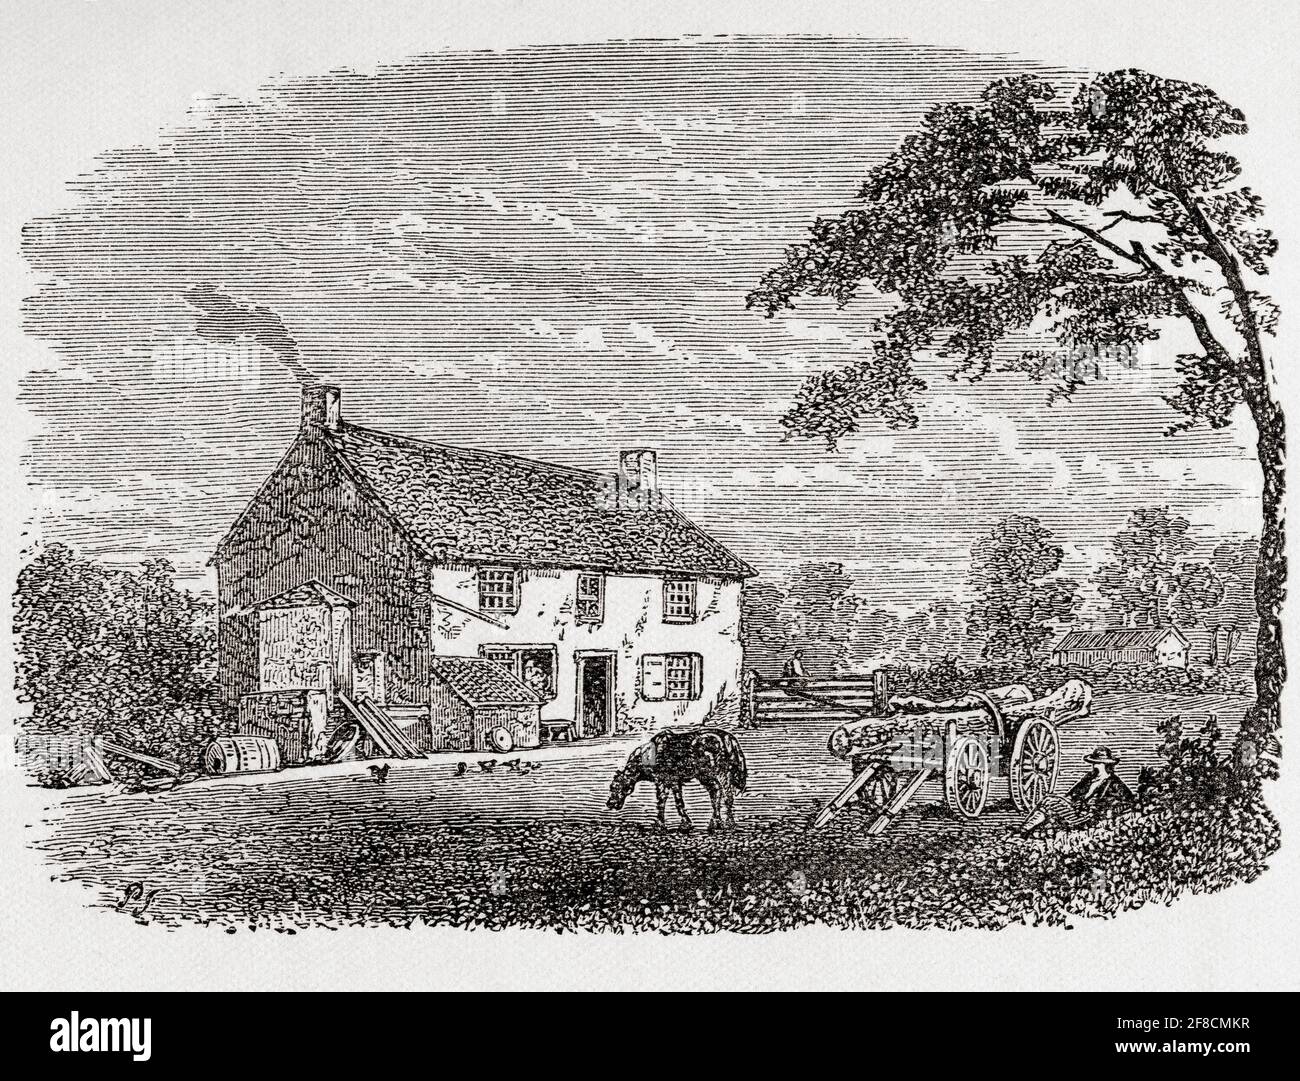 George Stephenson's Birthplace. An 18th-century stone cottage home of George Stephenson, Wylam, Northumberland, England, seen here in the 19th century.  From Great Engineers, published c.1890 Stock Photo